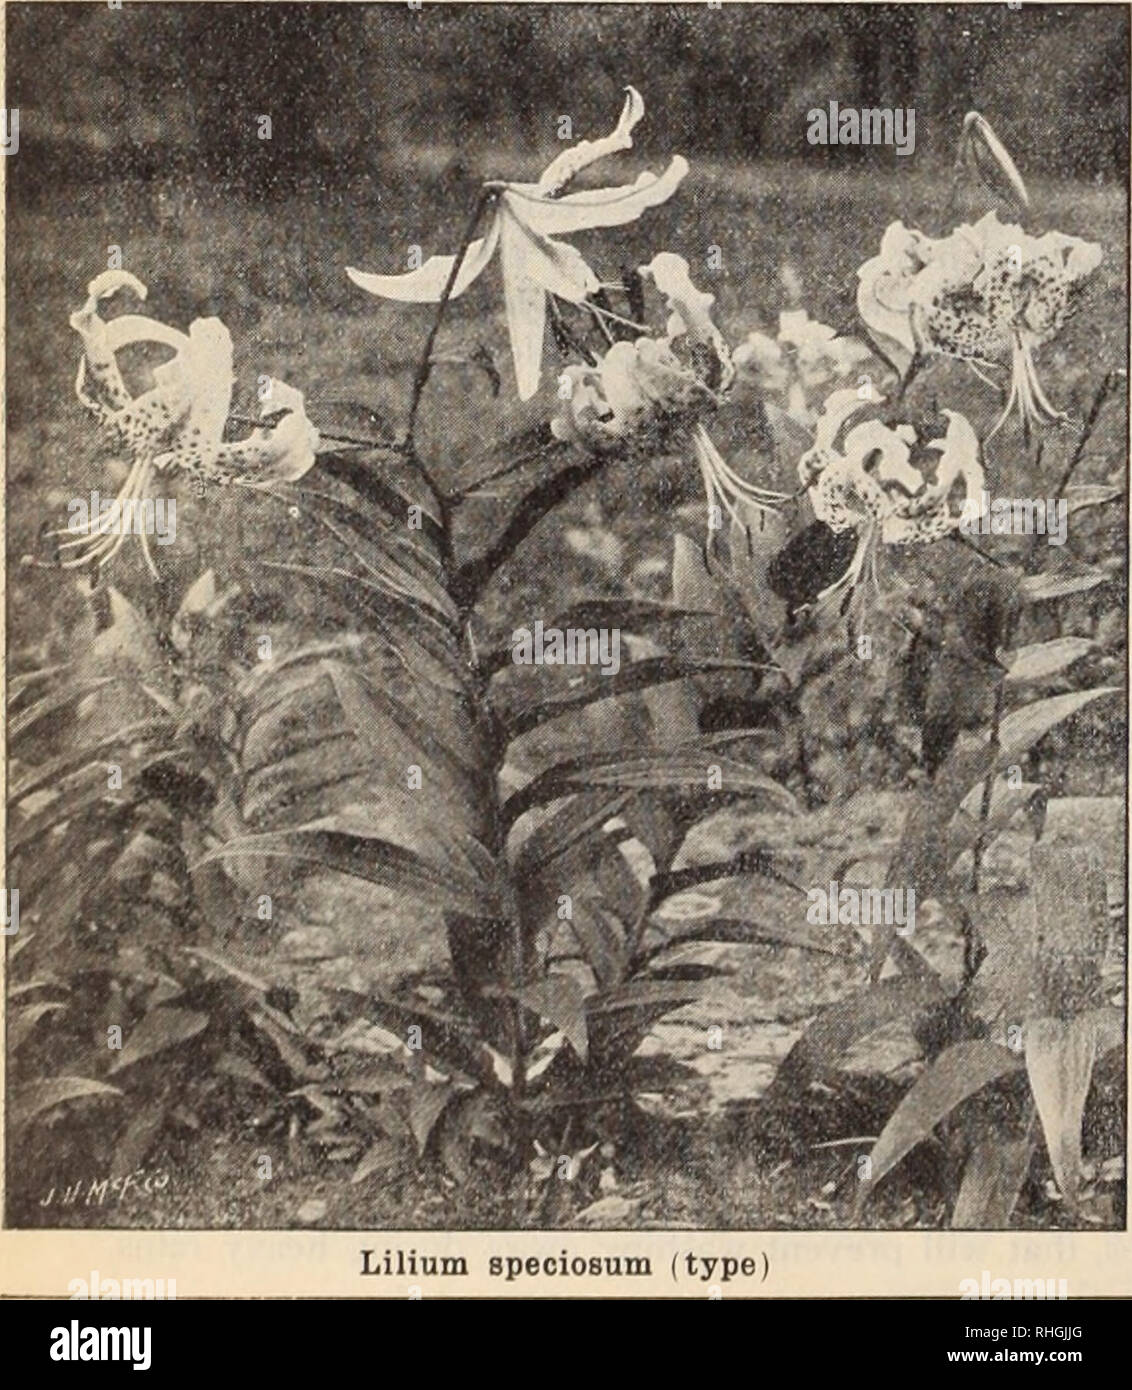 . Boddington's quality bulbs, seeds and plants / Arthur T. Boddington.. Nursery Catalogue. Doz. $4 00 $30 00 3 50 25 00 6 03 45 00 LILIUM AURATUM PLATYPHYLLUM. Each A very strong and vigorous type of L. aui-aiiim. Flowers of immei sesize, pure ivory white, with a deep golden band through each petal. Mammoth bulbs $0 50 Large bulbs 40 LILIUM AURATUM RUBRUM VITTA- TUM. A uni(|ue variety; flowers 10 to 12 inches across, ivory white, with broad crimson stripe through center of each petal. Large bulbs 60 LILIUM AURATUM VIRGINALE ALBUM. The White Lily of Japan. Exqui- sitely pure white flowers, very Stock Photo